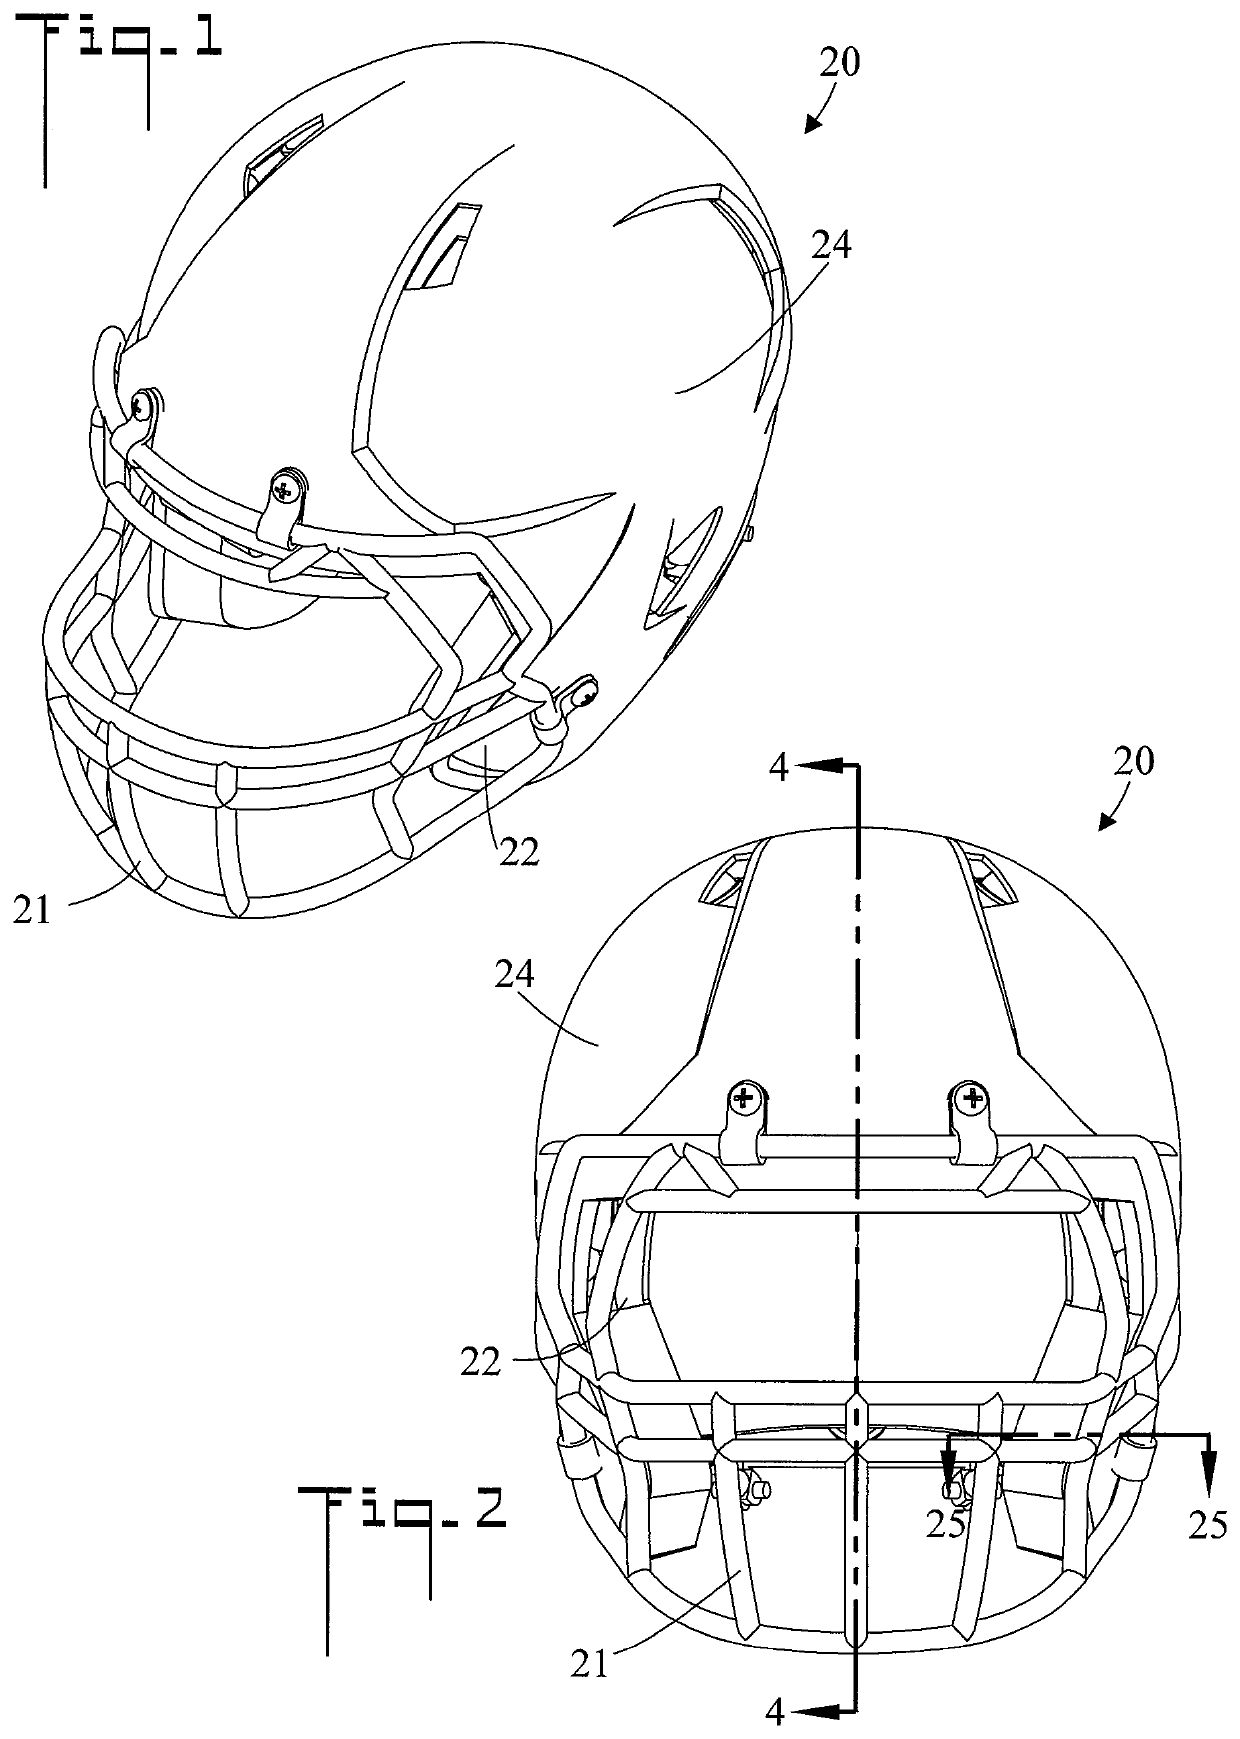 Apparatus for protecting the head of a person from an external force